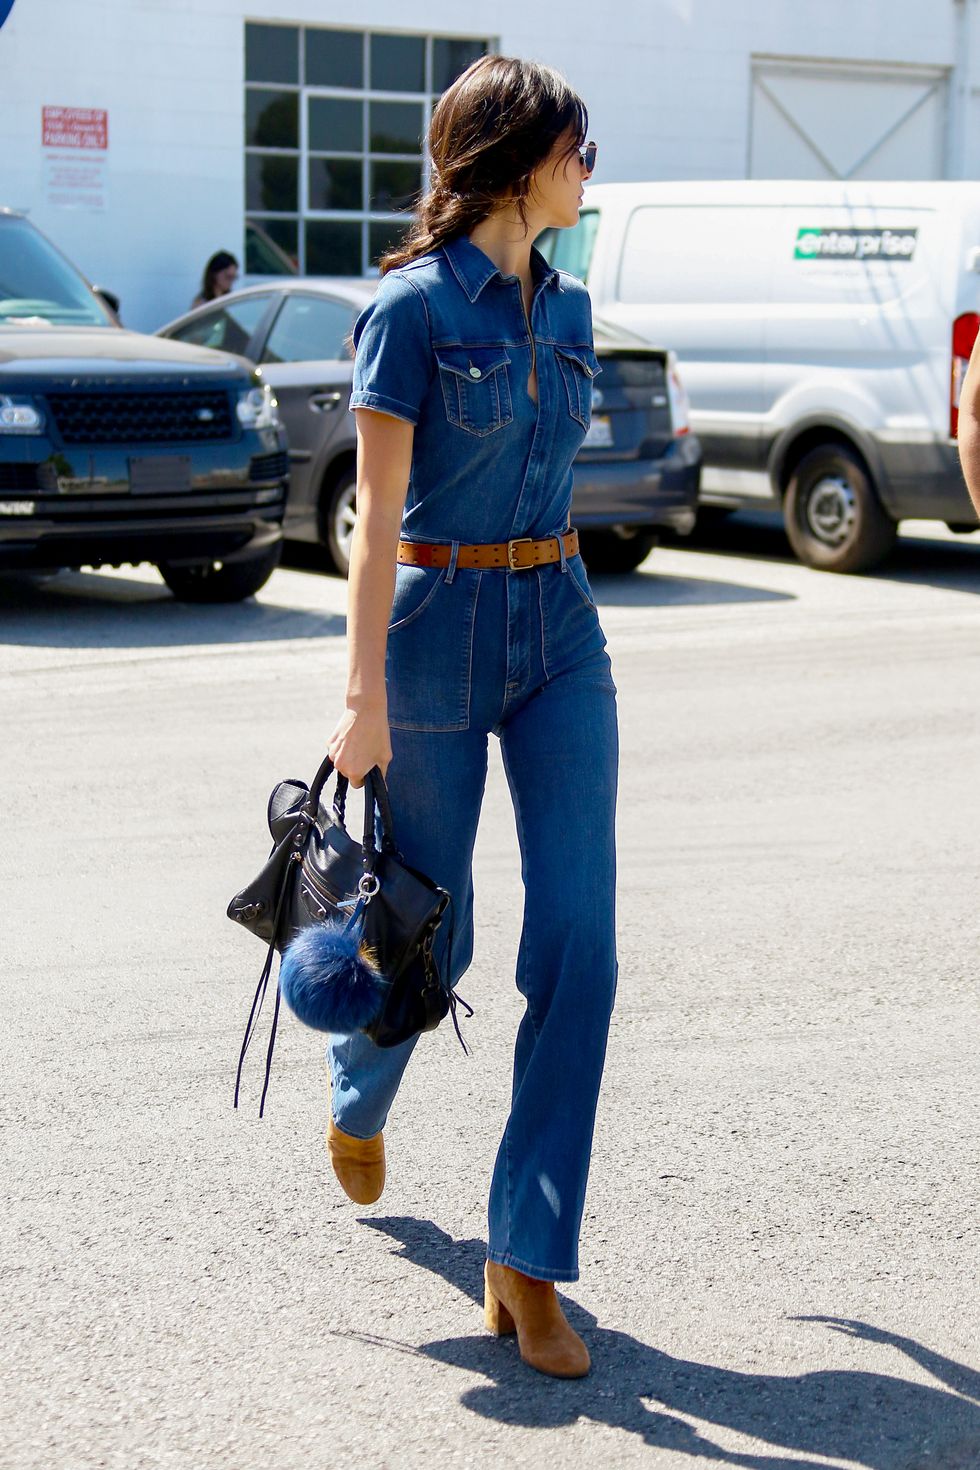 Kendall Jenner is all of our denim dreams come true in this cool jumpsuit